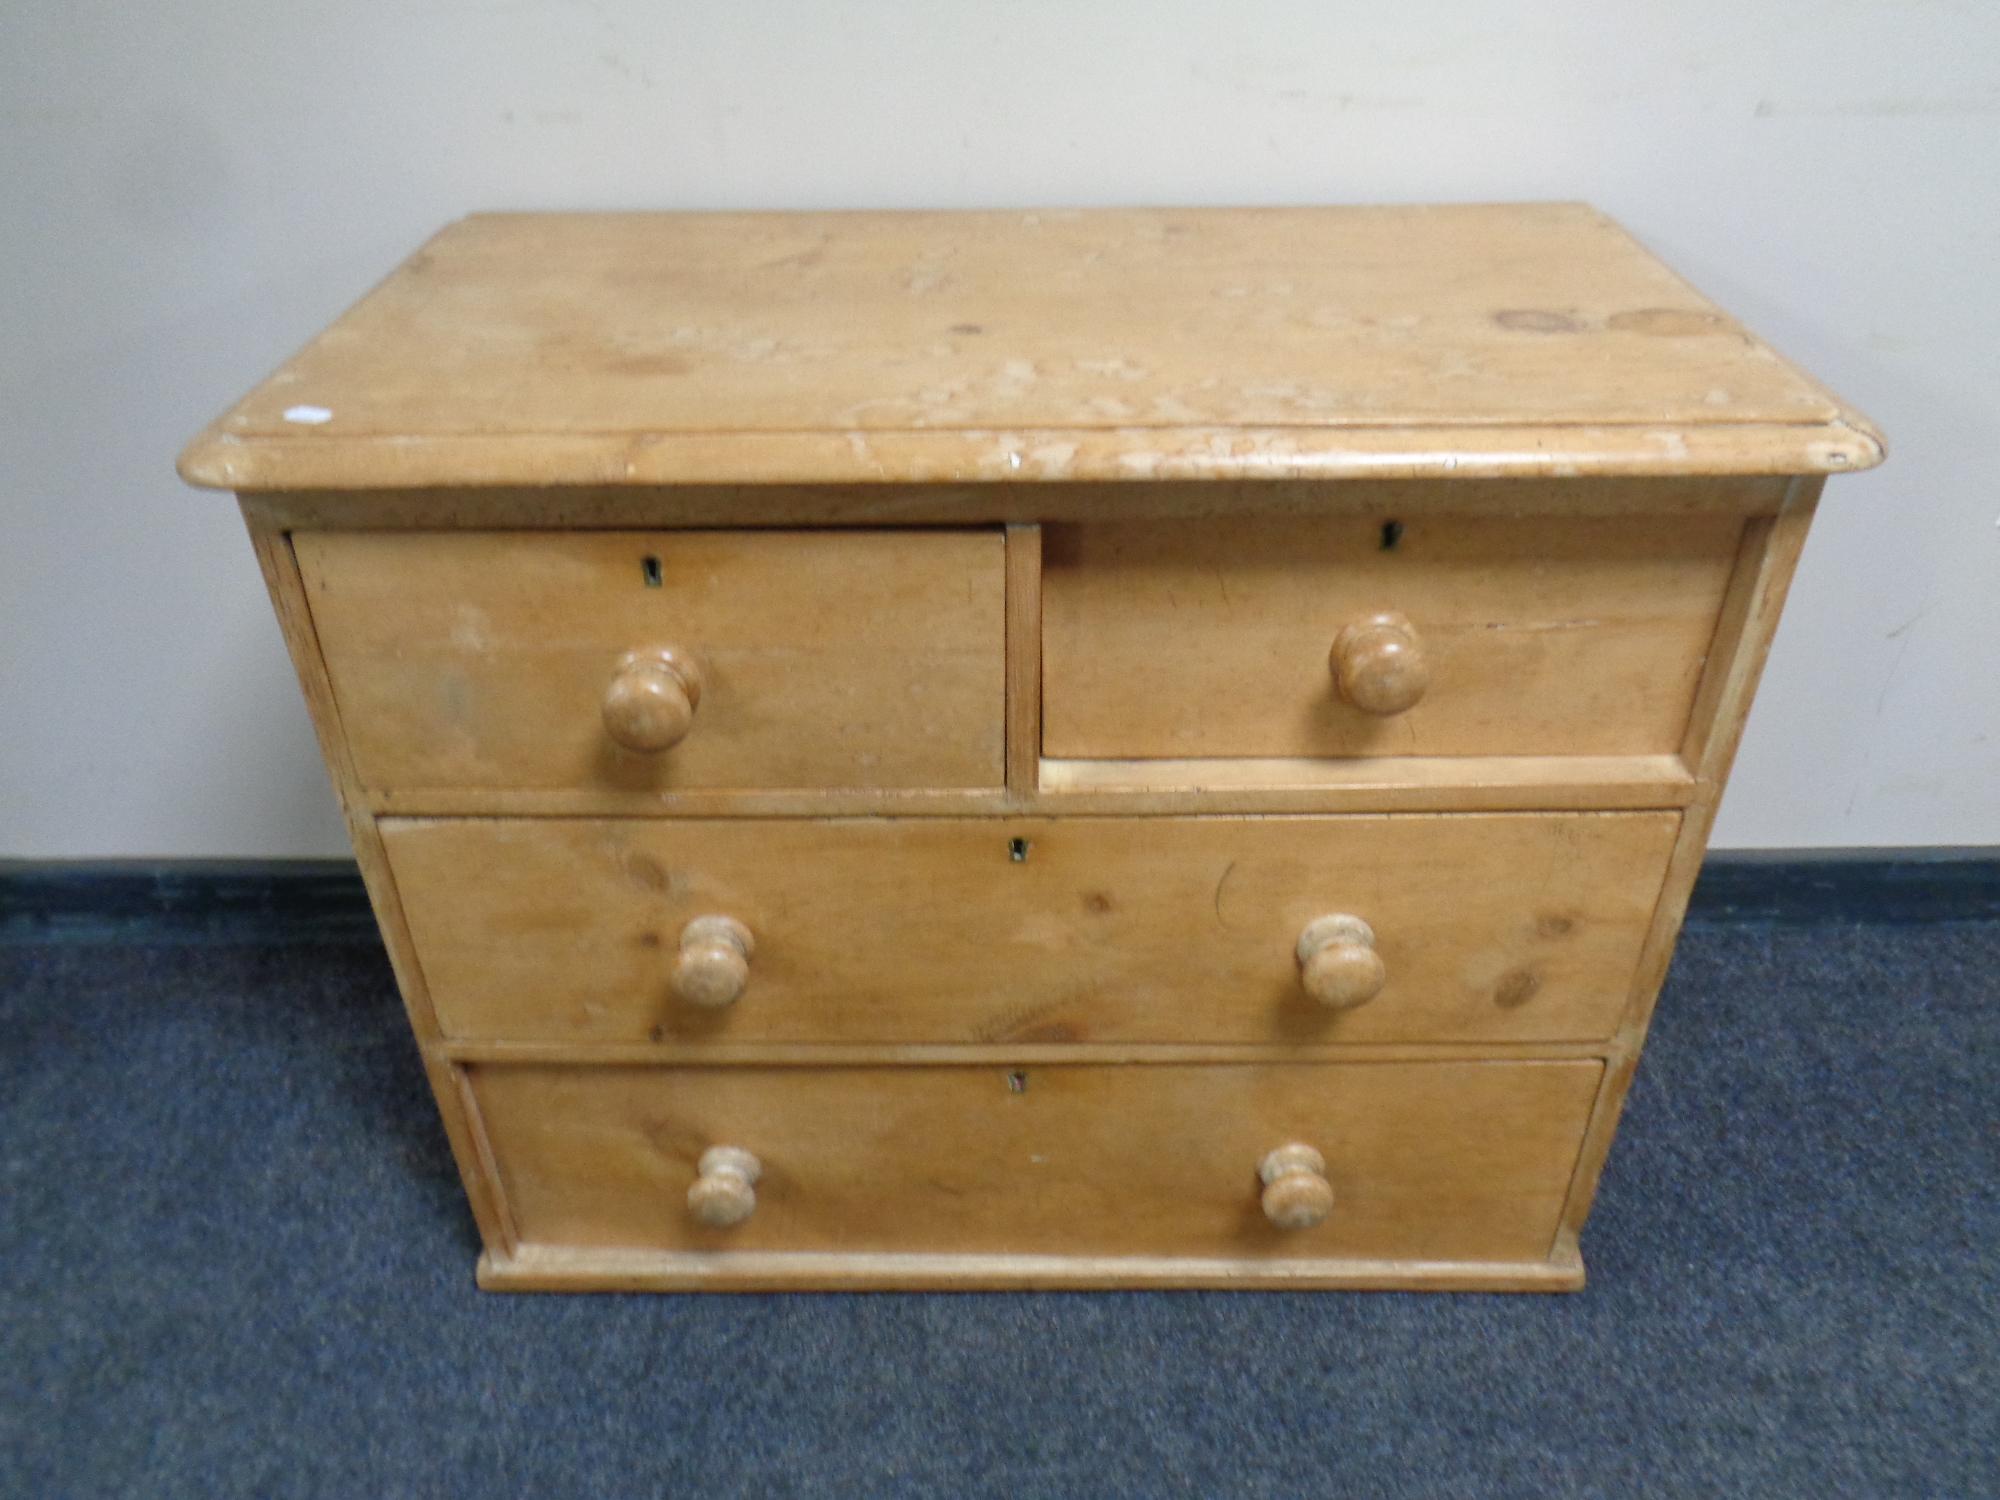 An antique pine four drawer chest